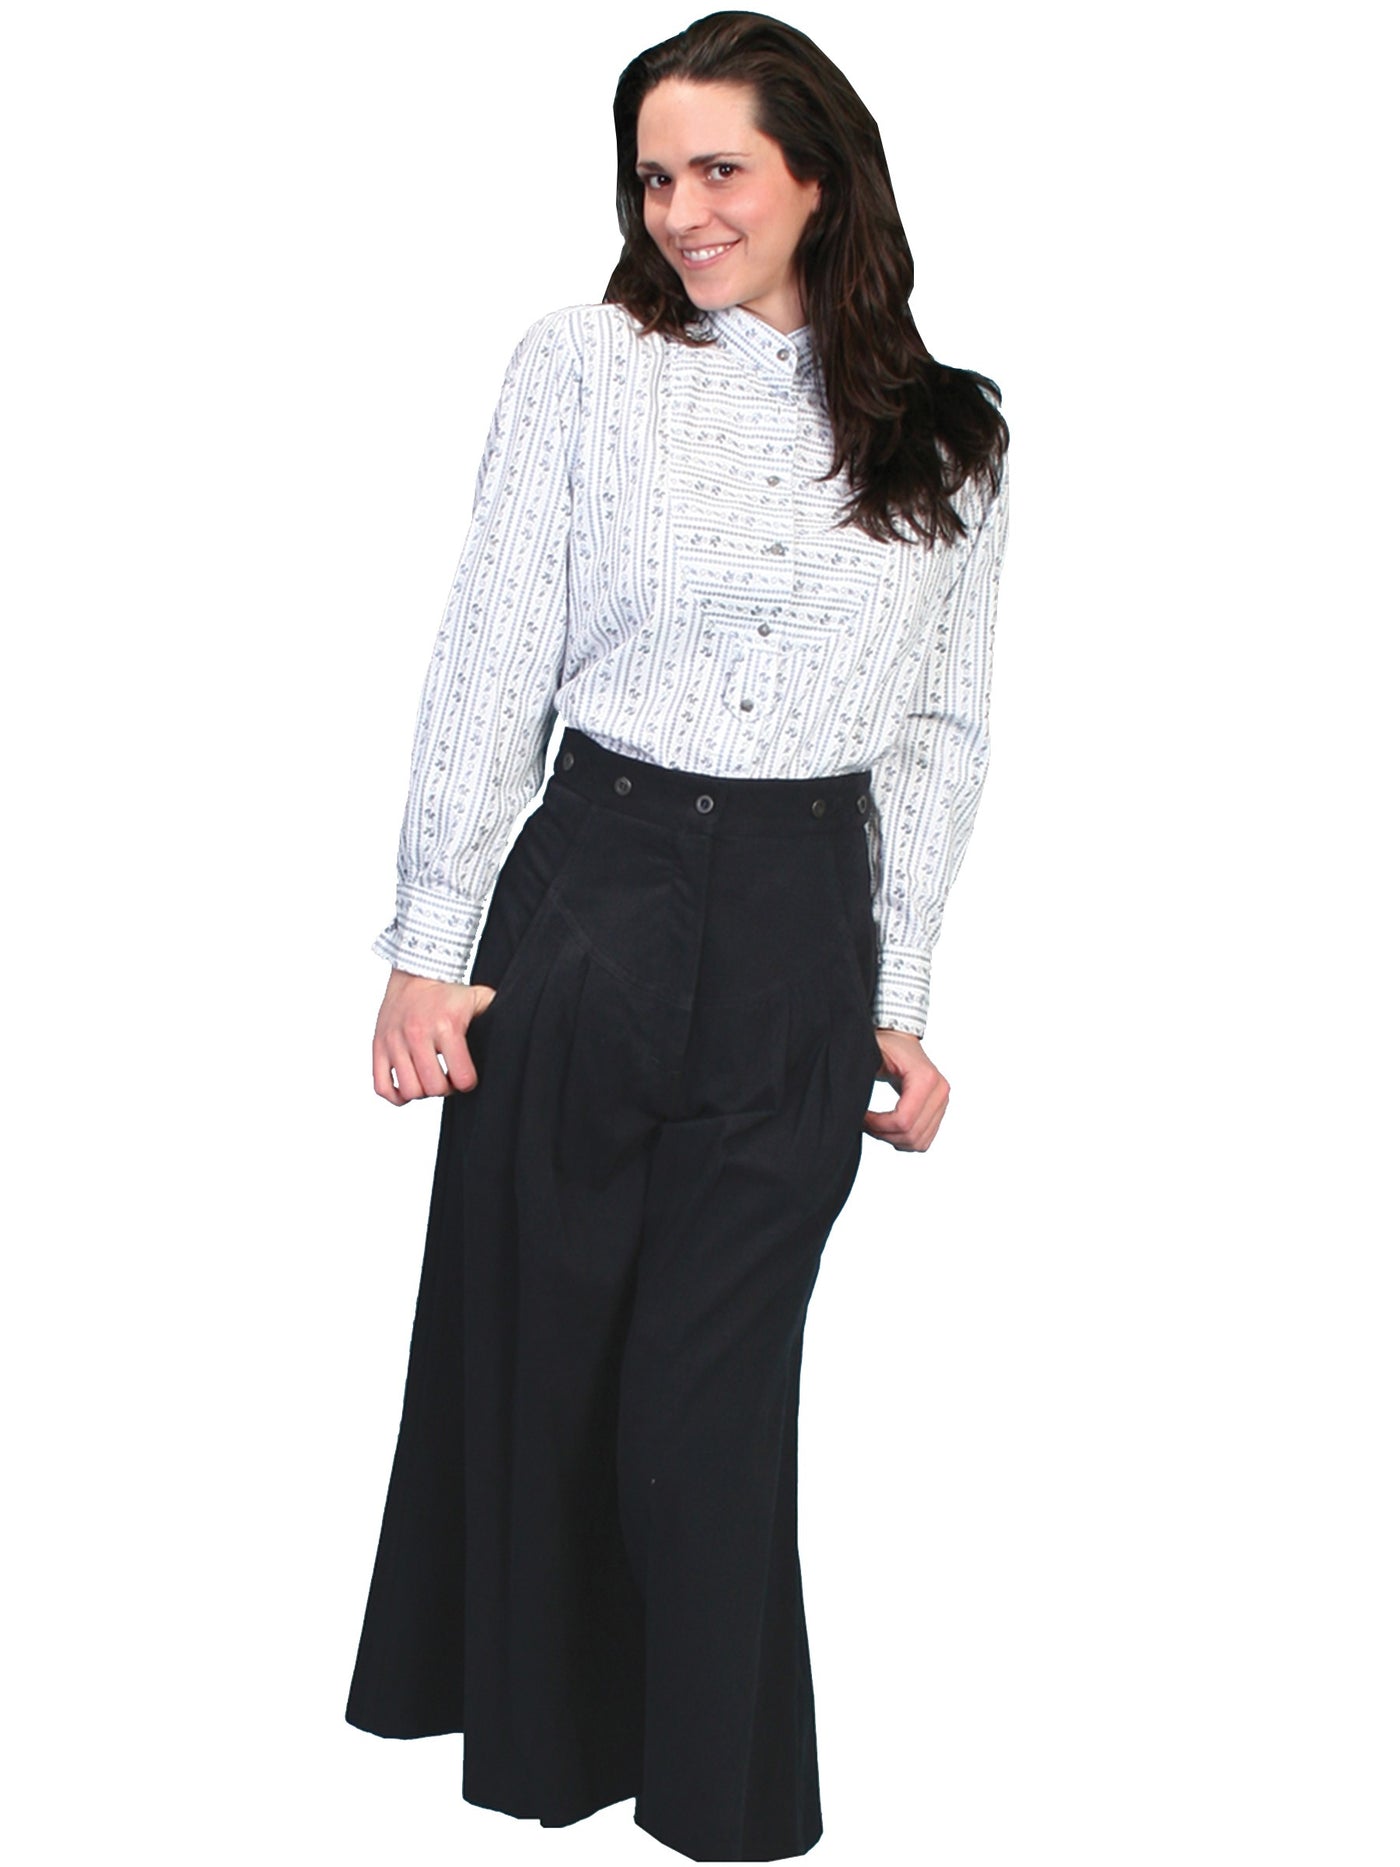 Cowgirl Horse Riding Shortened Trousers in Black - SOLD OUT